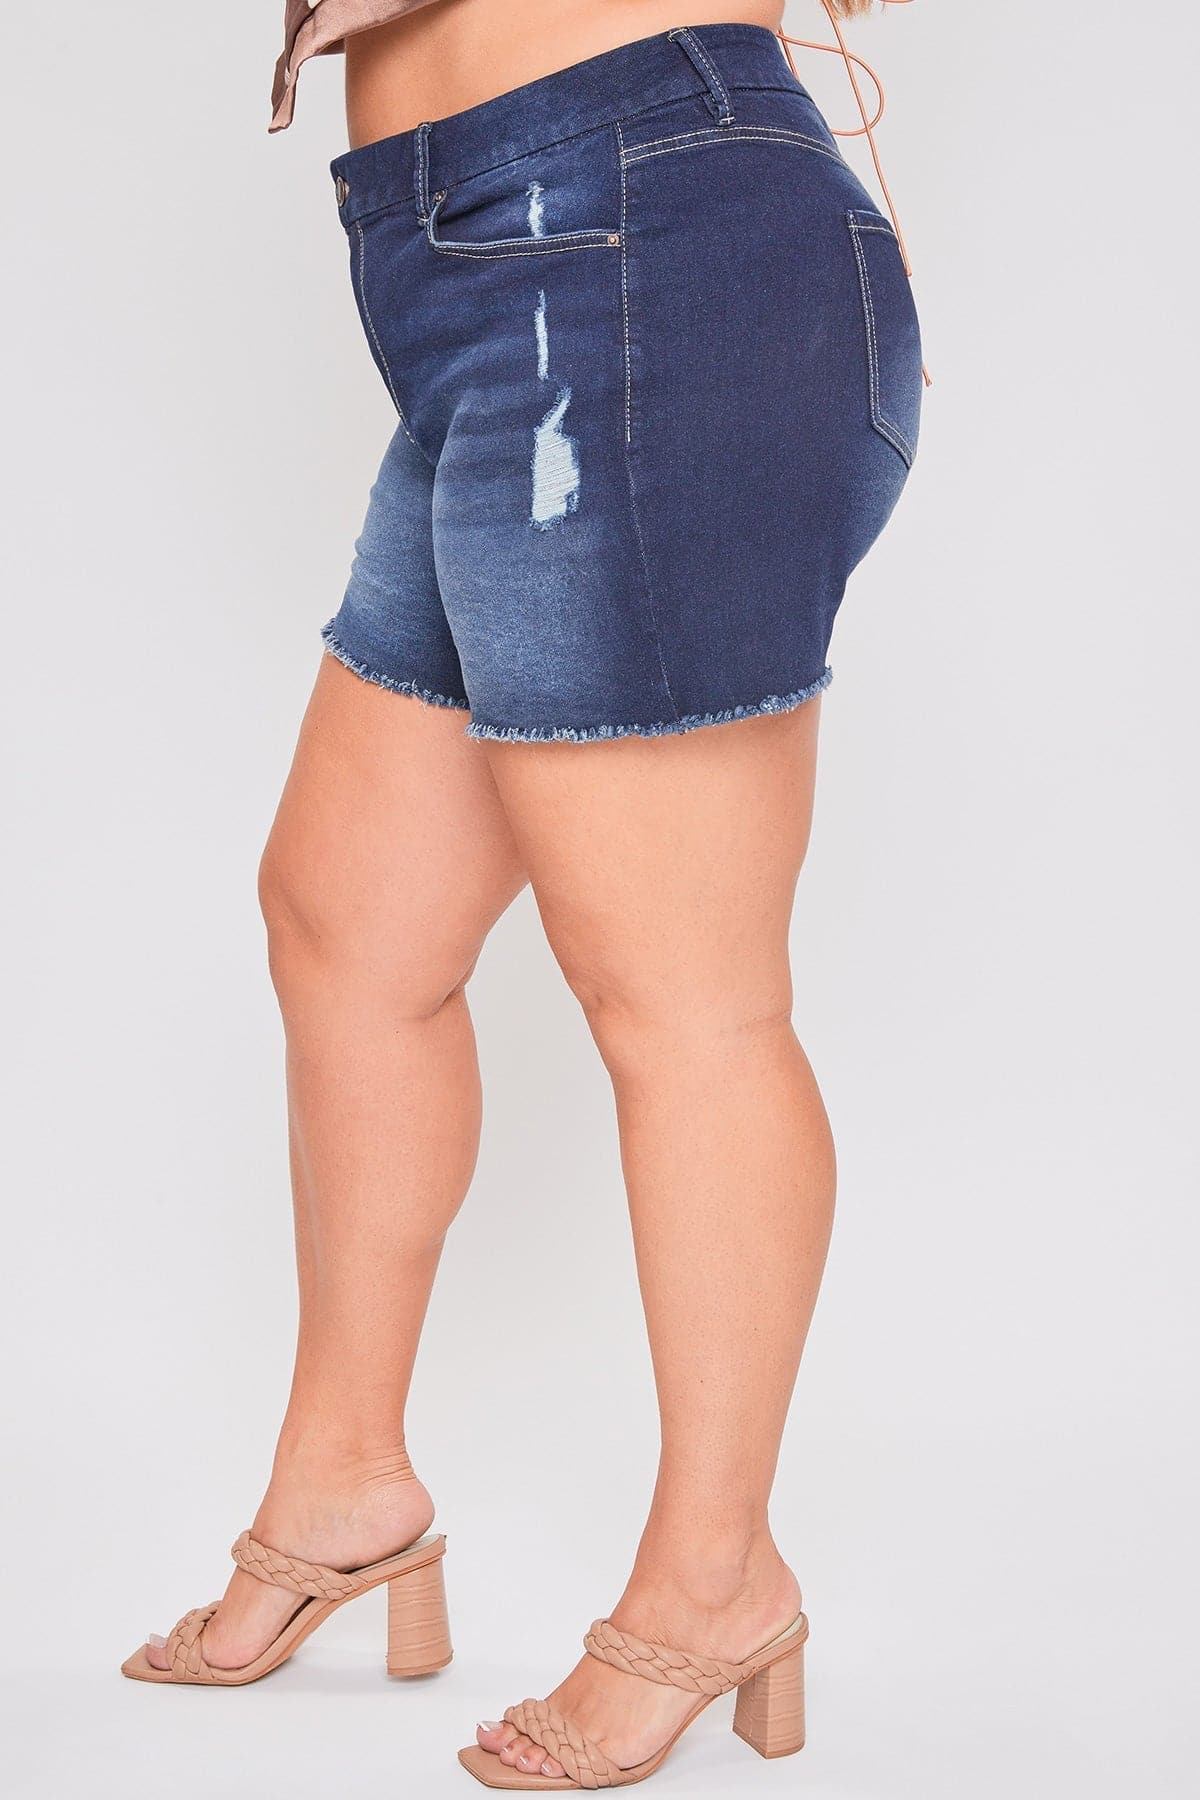 Women's Plus Size Curvy Fit  Jeans Shorts With Fray Hem